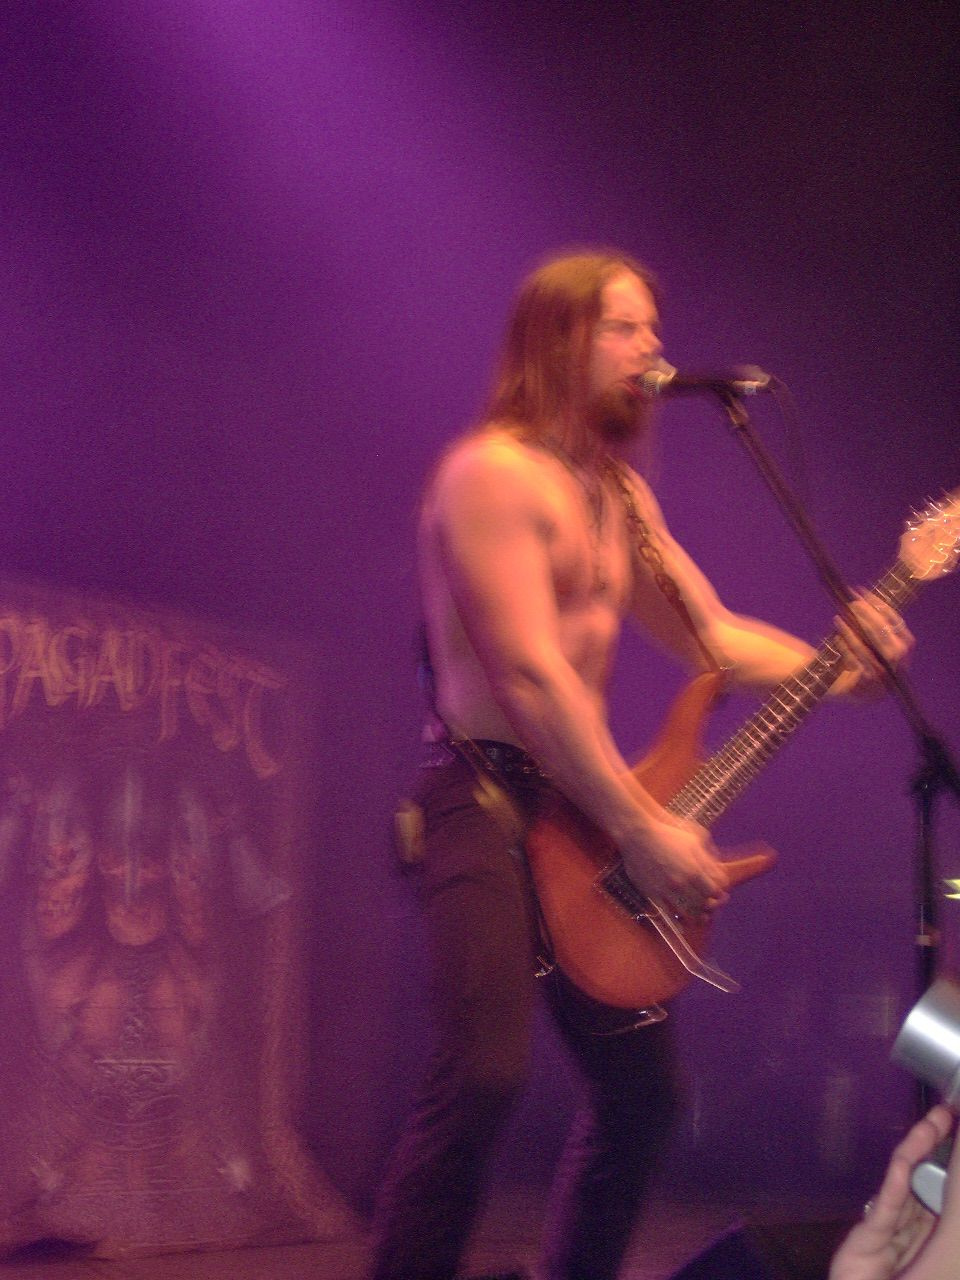 Paganfest 006